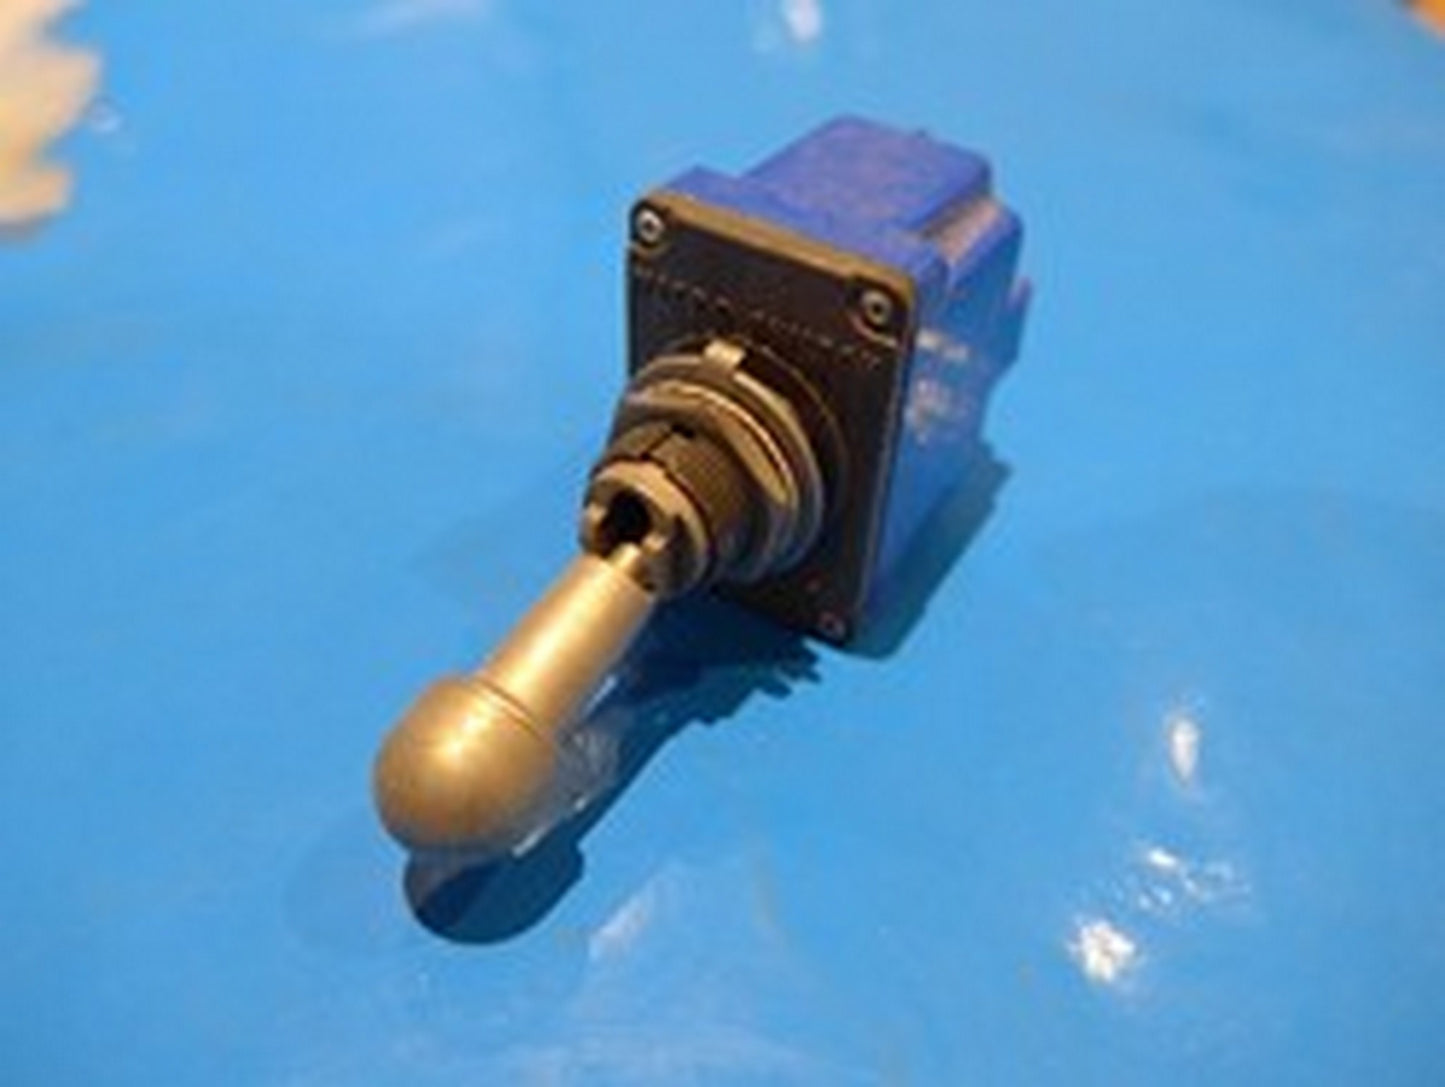 Toggle Switch (A/R)